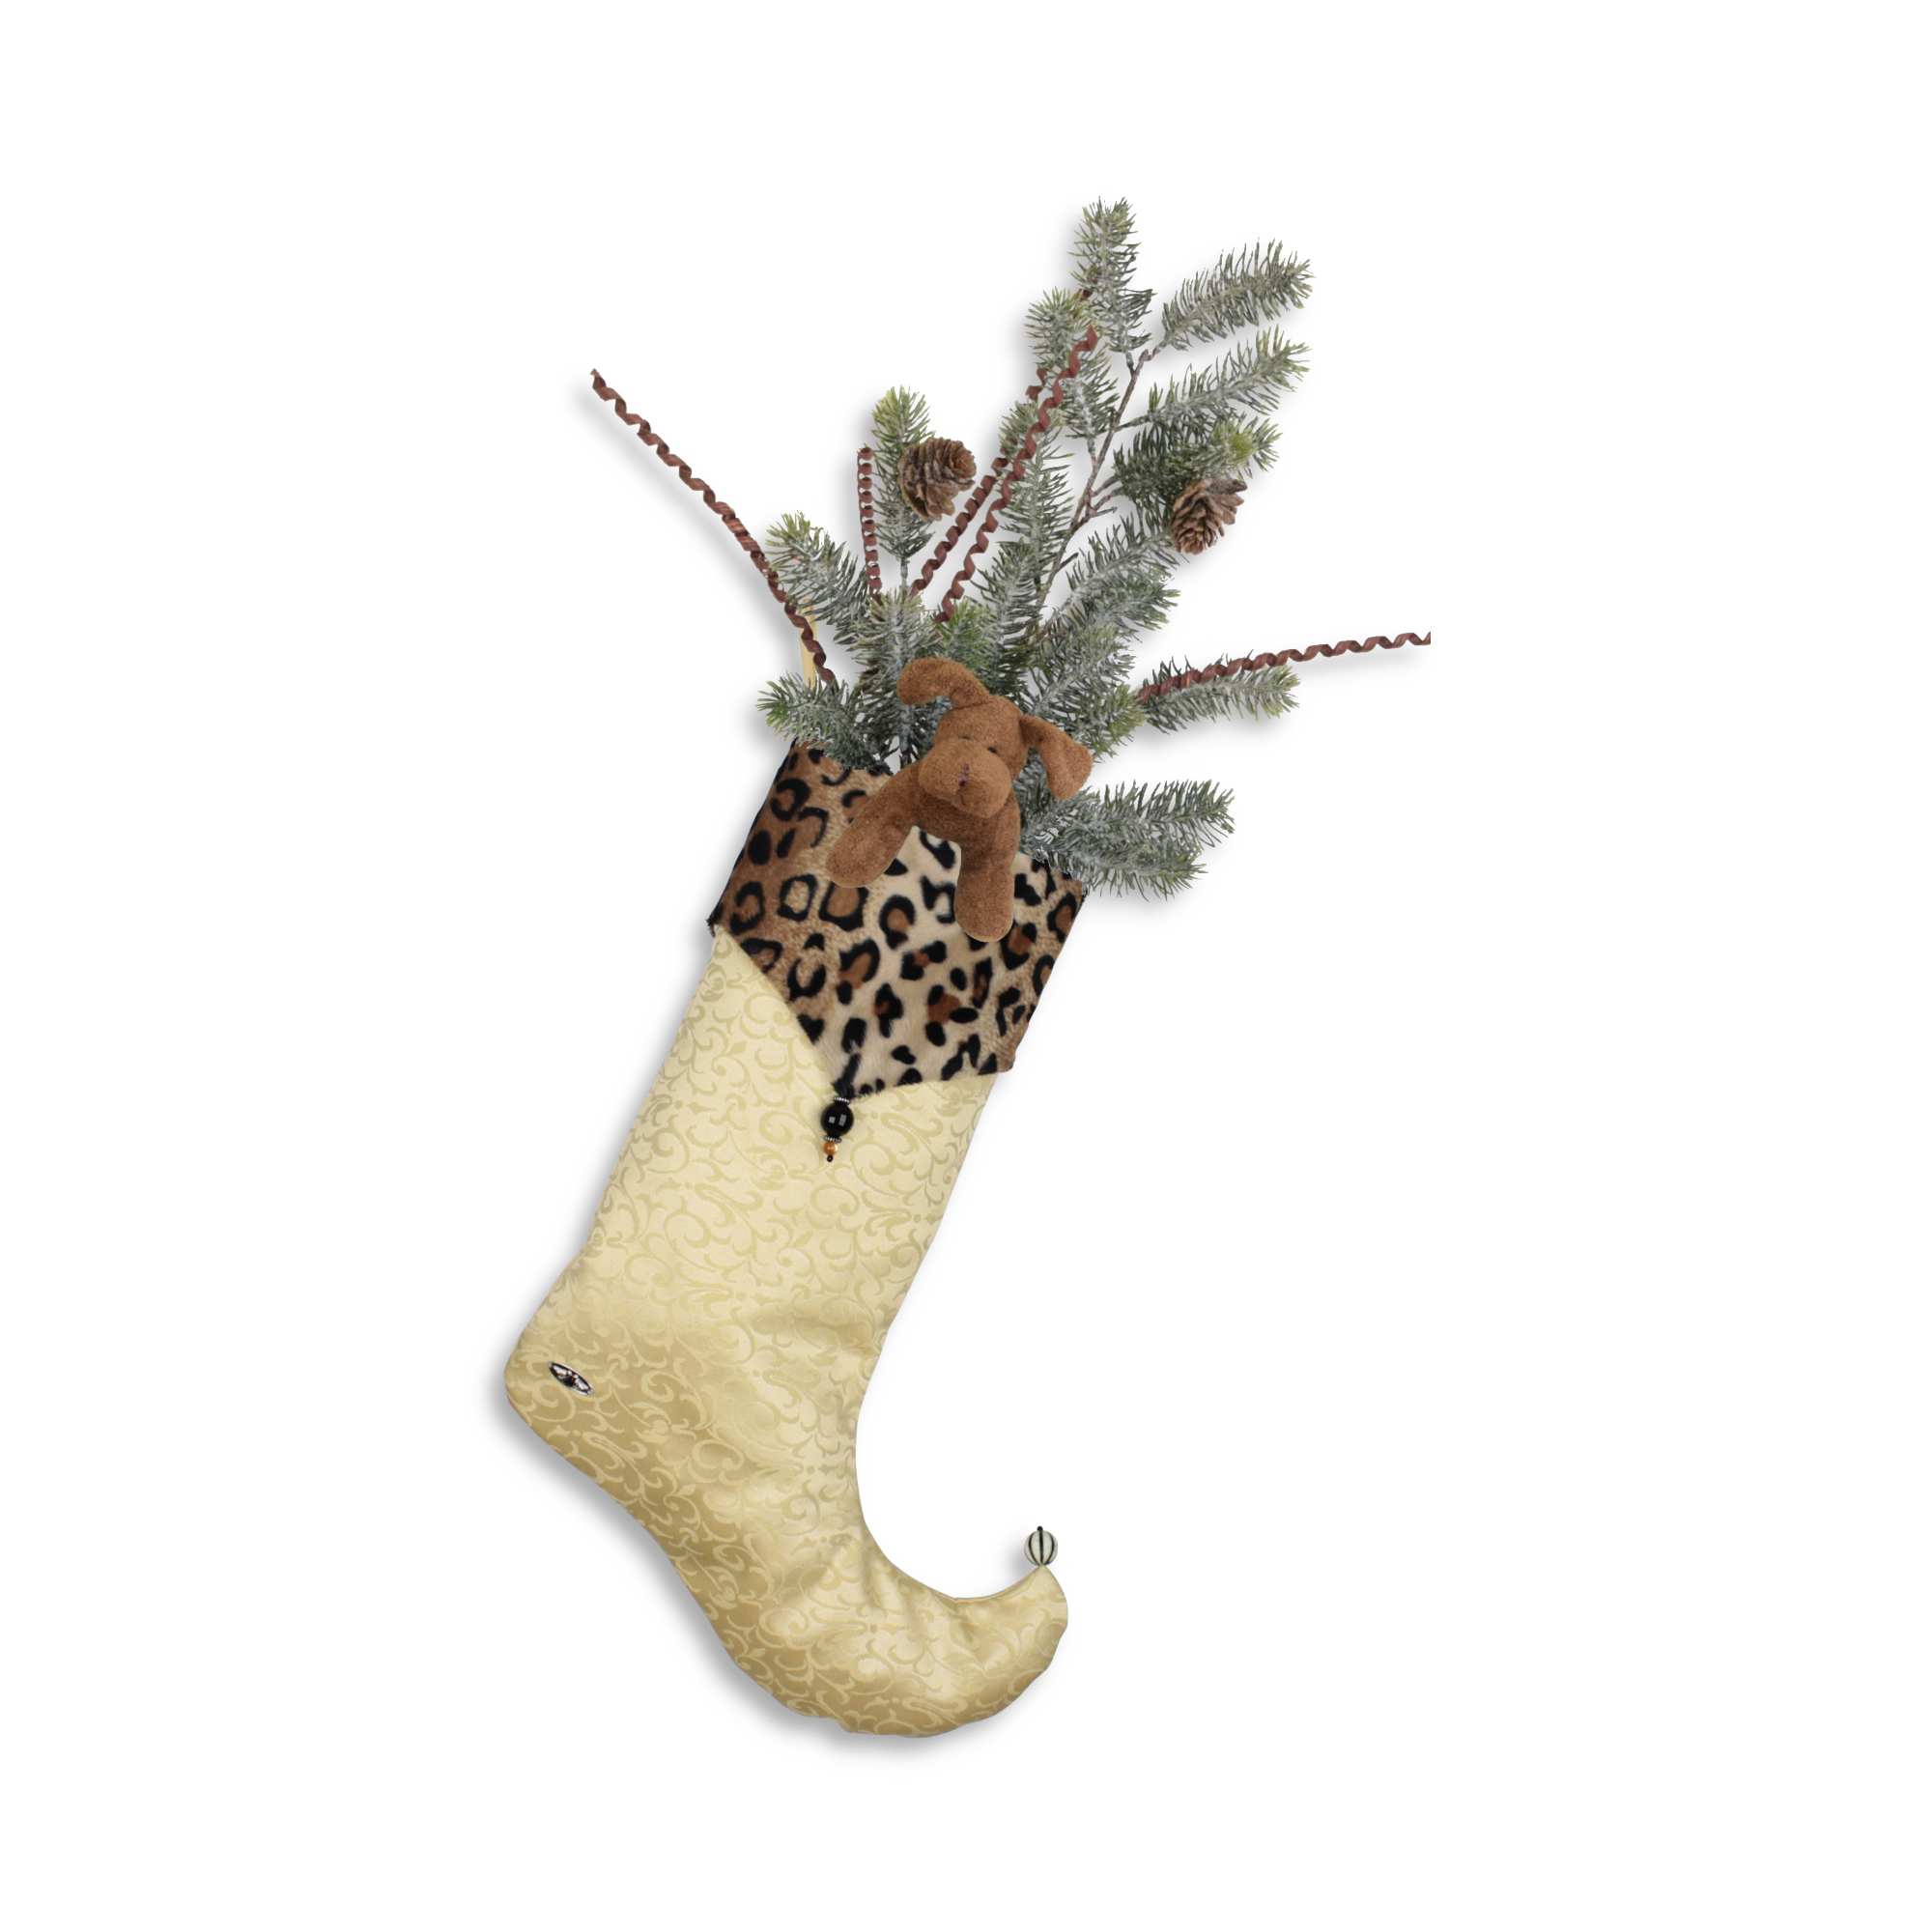 Salomon Christmas stocking decorated with a plush dog and fir branches and pinecones.